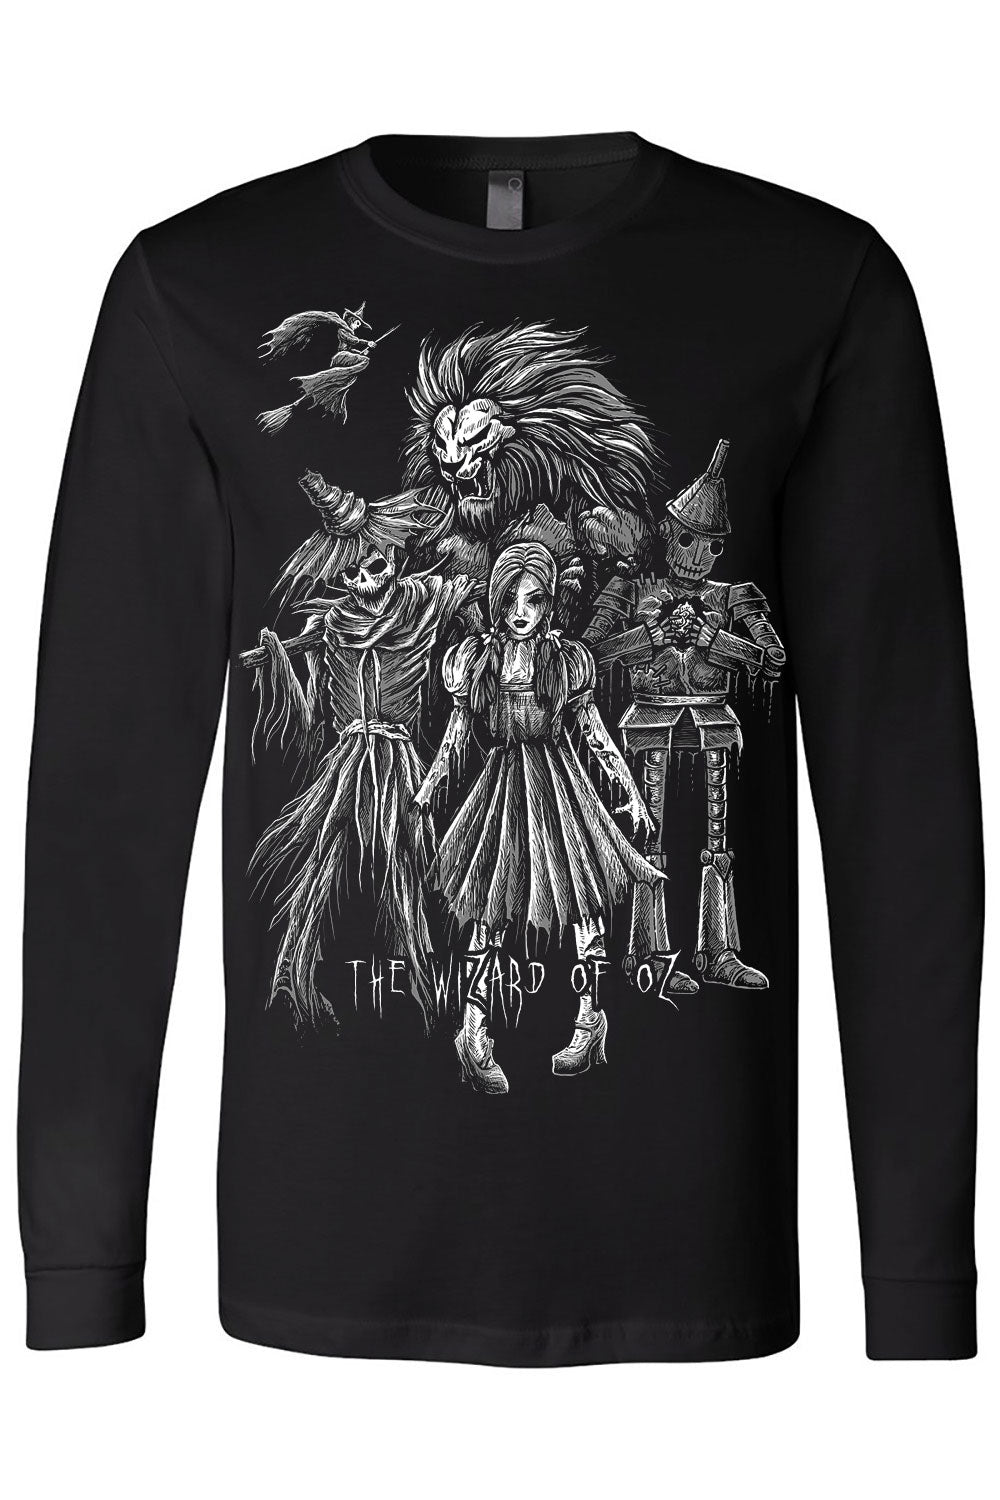 long sleeve gothic wizard of oz shirt